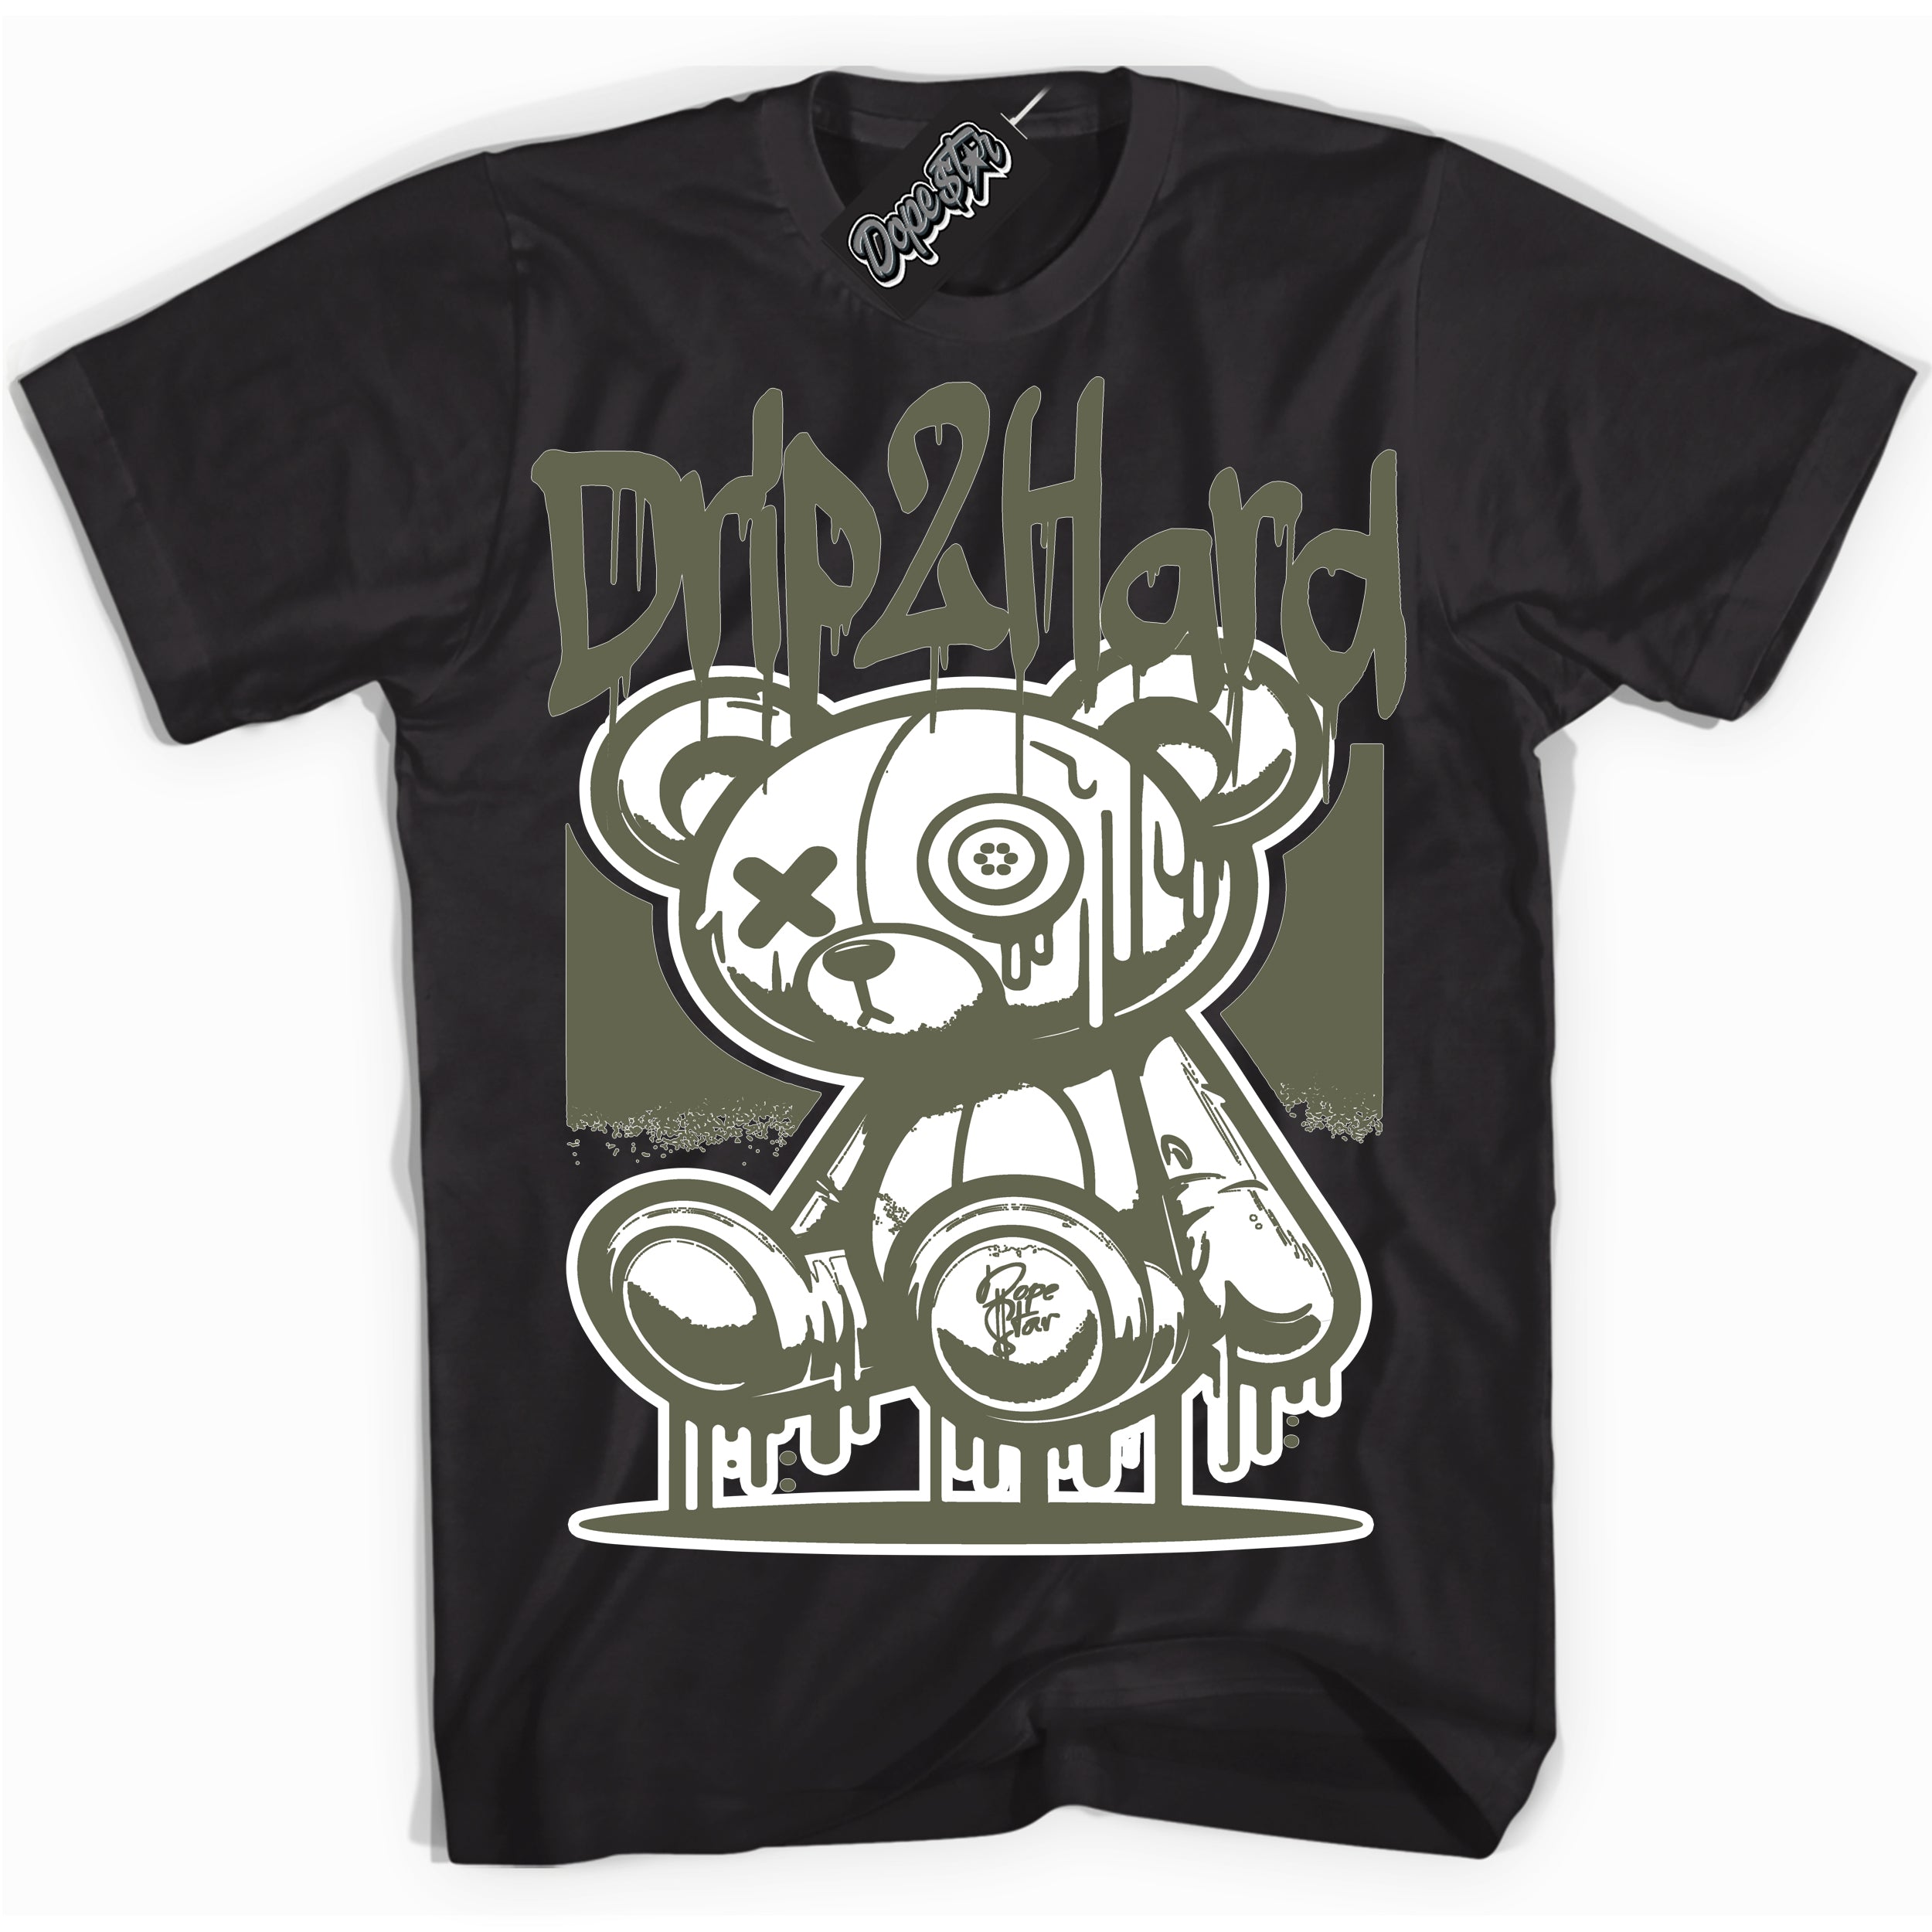 Cool Black graphic tee with “ Drip 2 Hard ” design, that perfectly matches Dunk Low Medium Olive